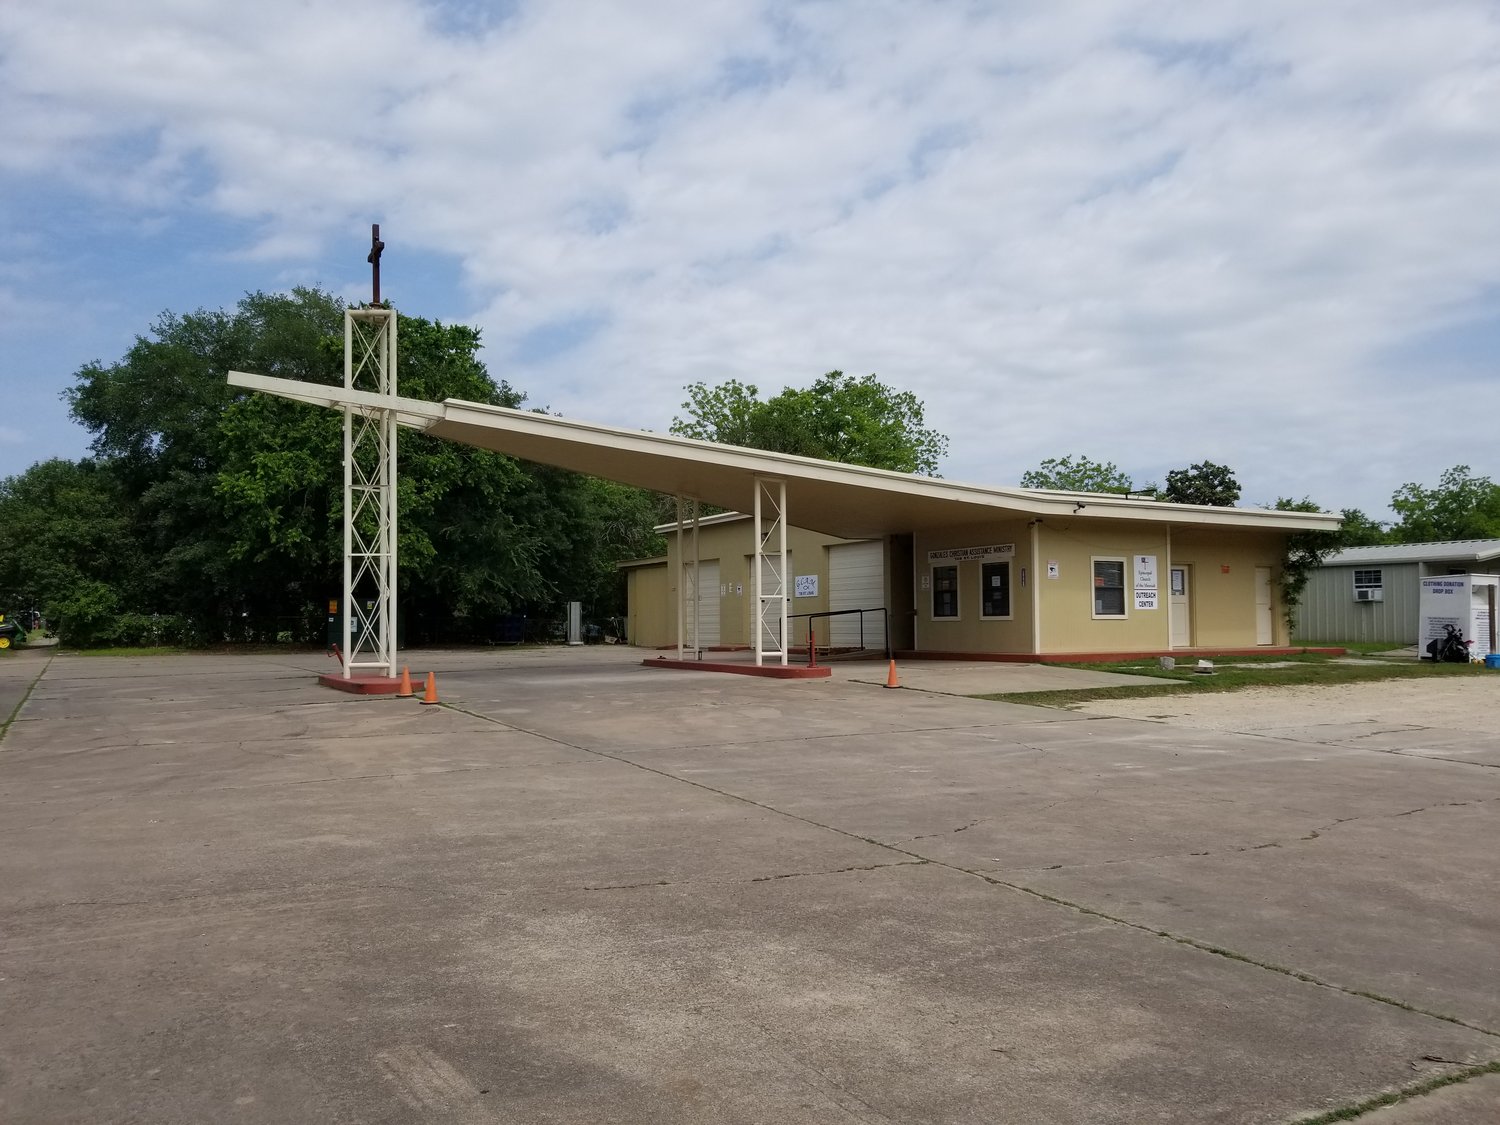 Gonzales Christian Assistance Ministry (GCAM) currently serves as a hotspot for free WiFi provided by GVTC. The free access to the internet provides students from around the area a place to “help bridge the homework gap.”